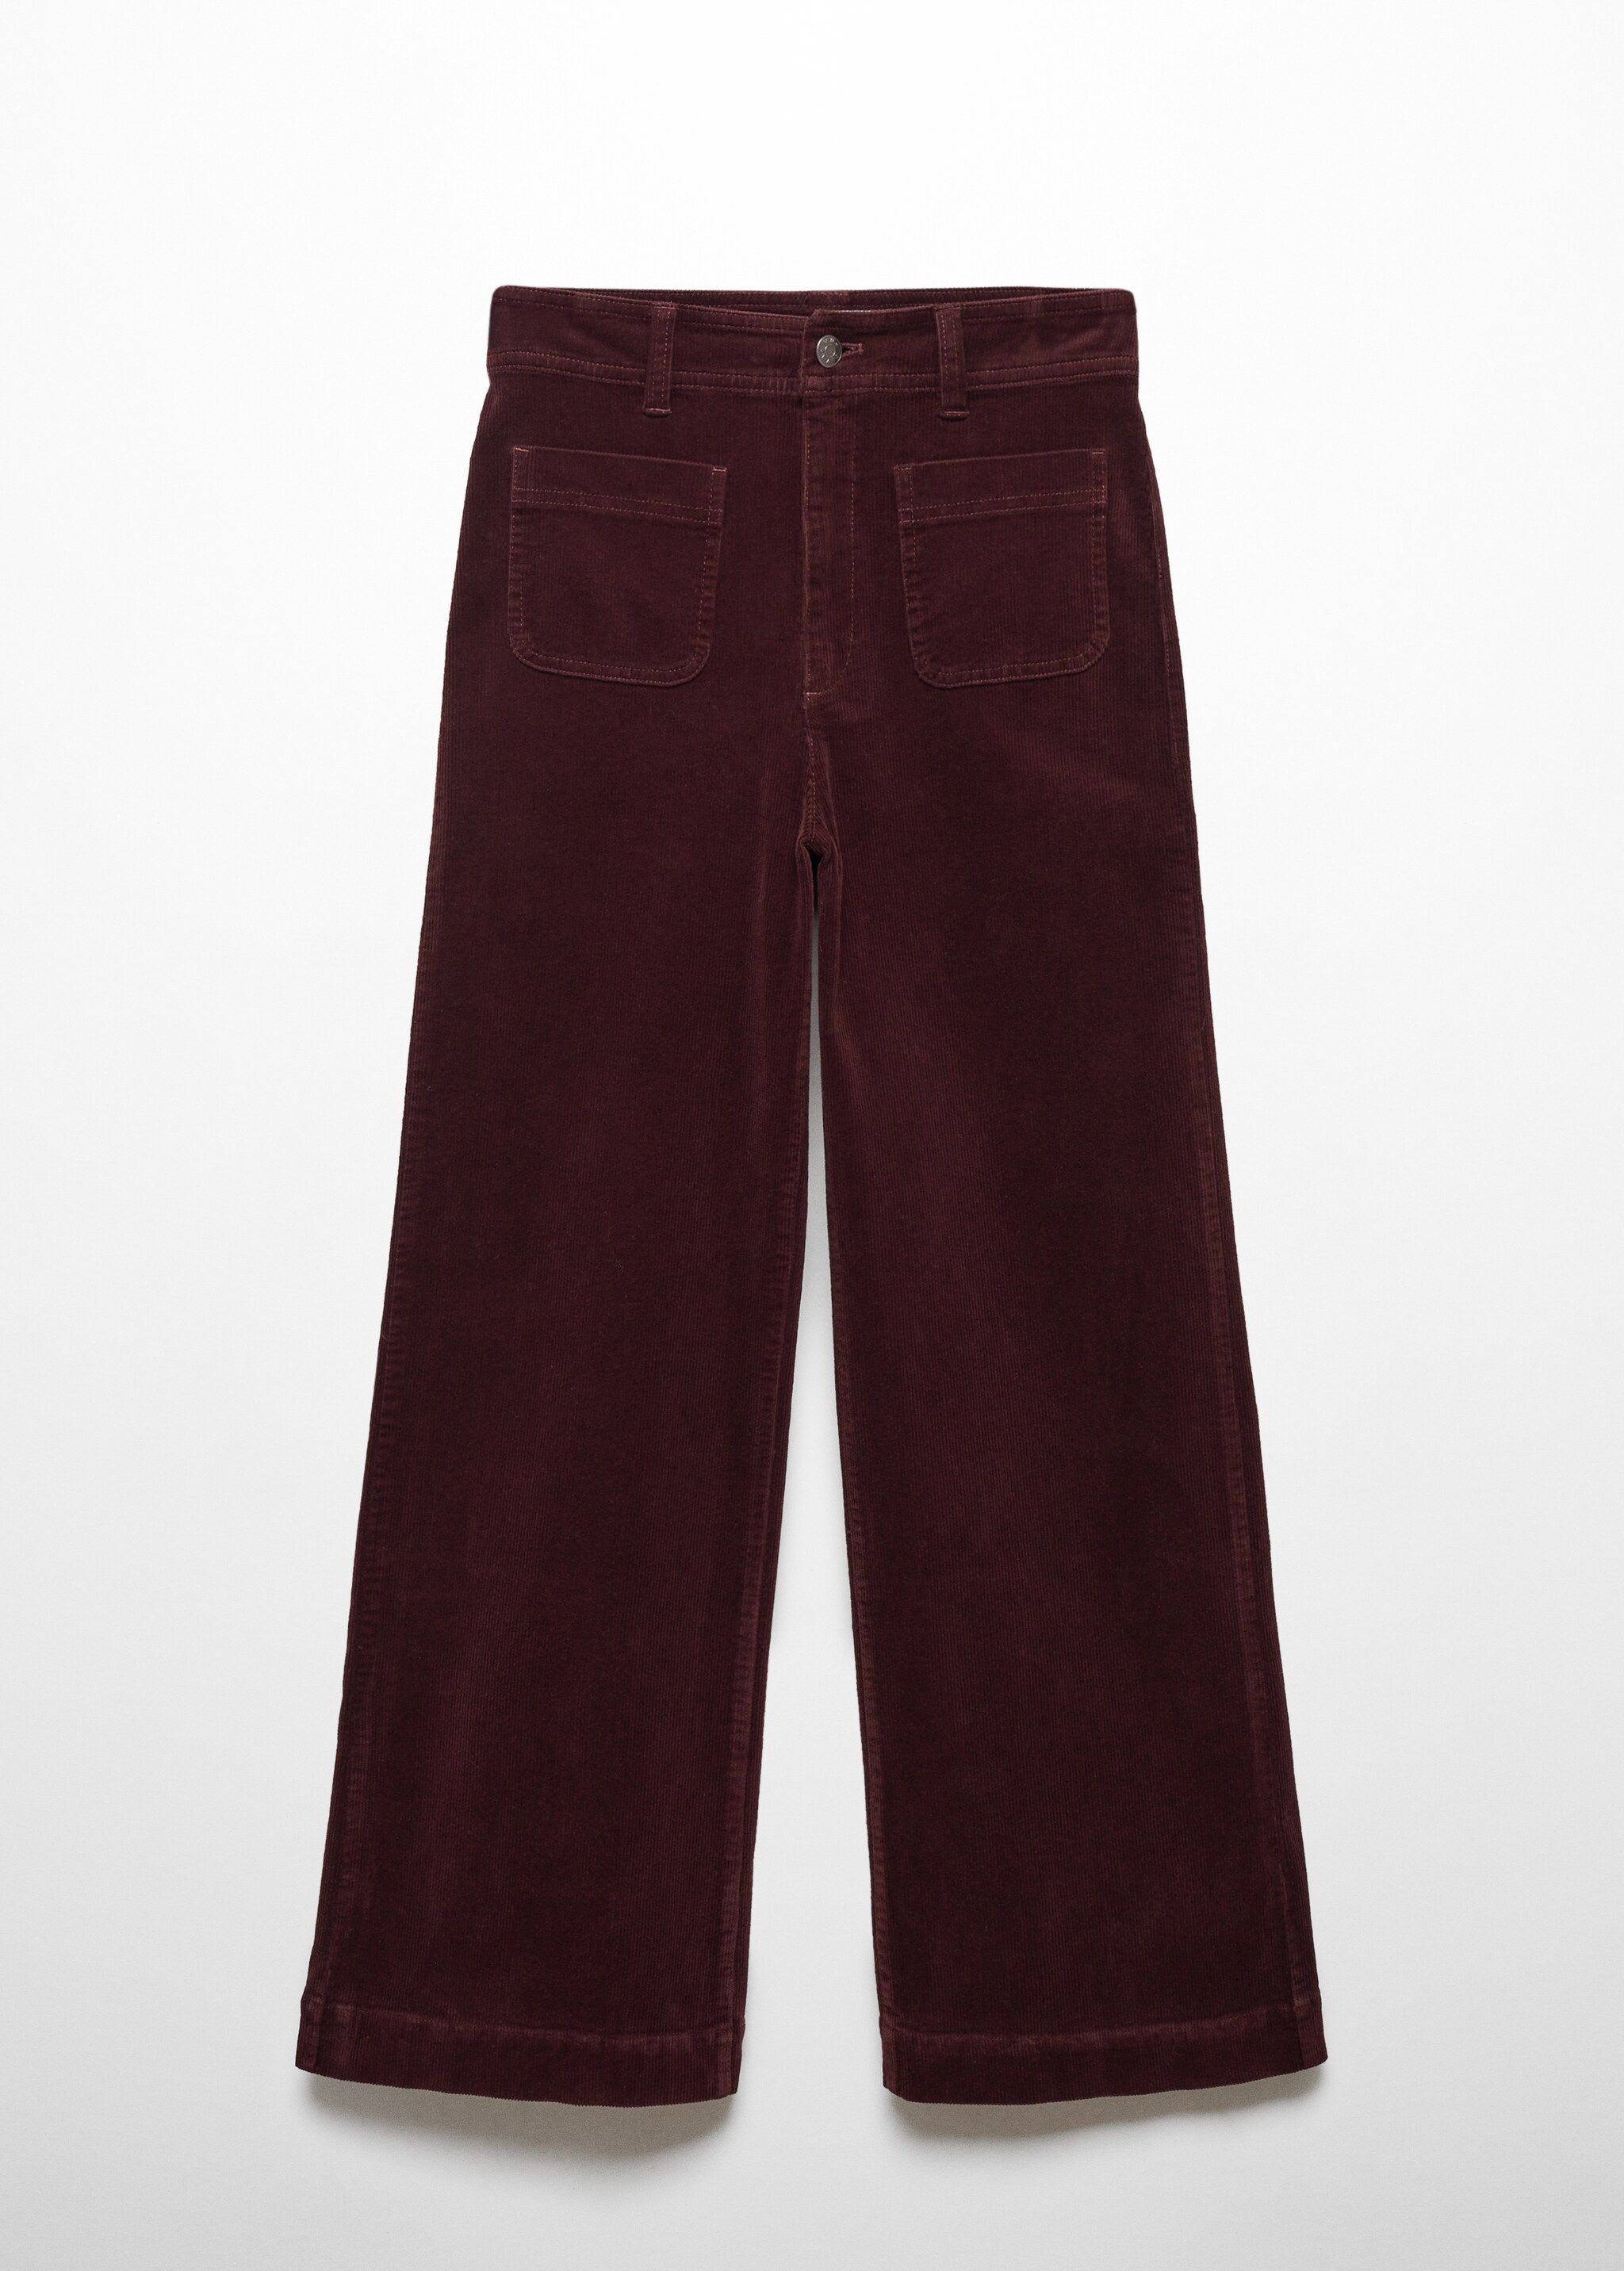 Corduroy culotte pants - Article without model